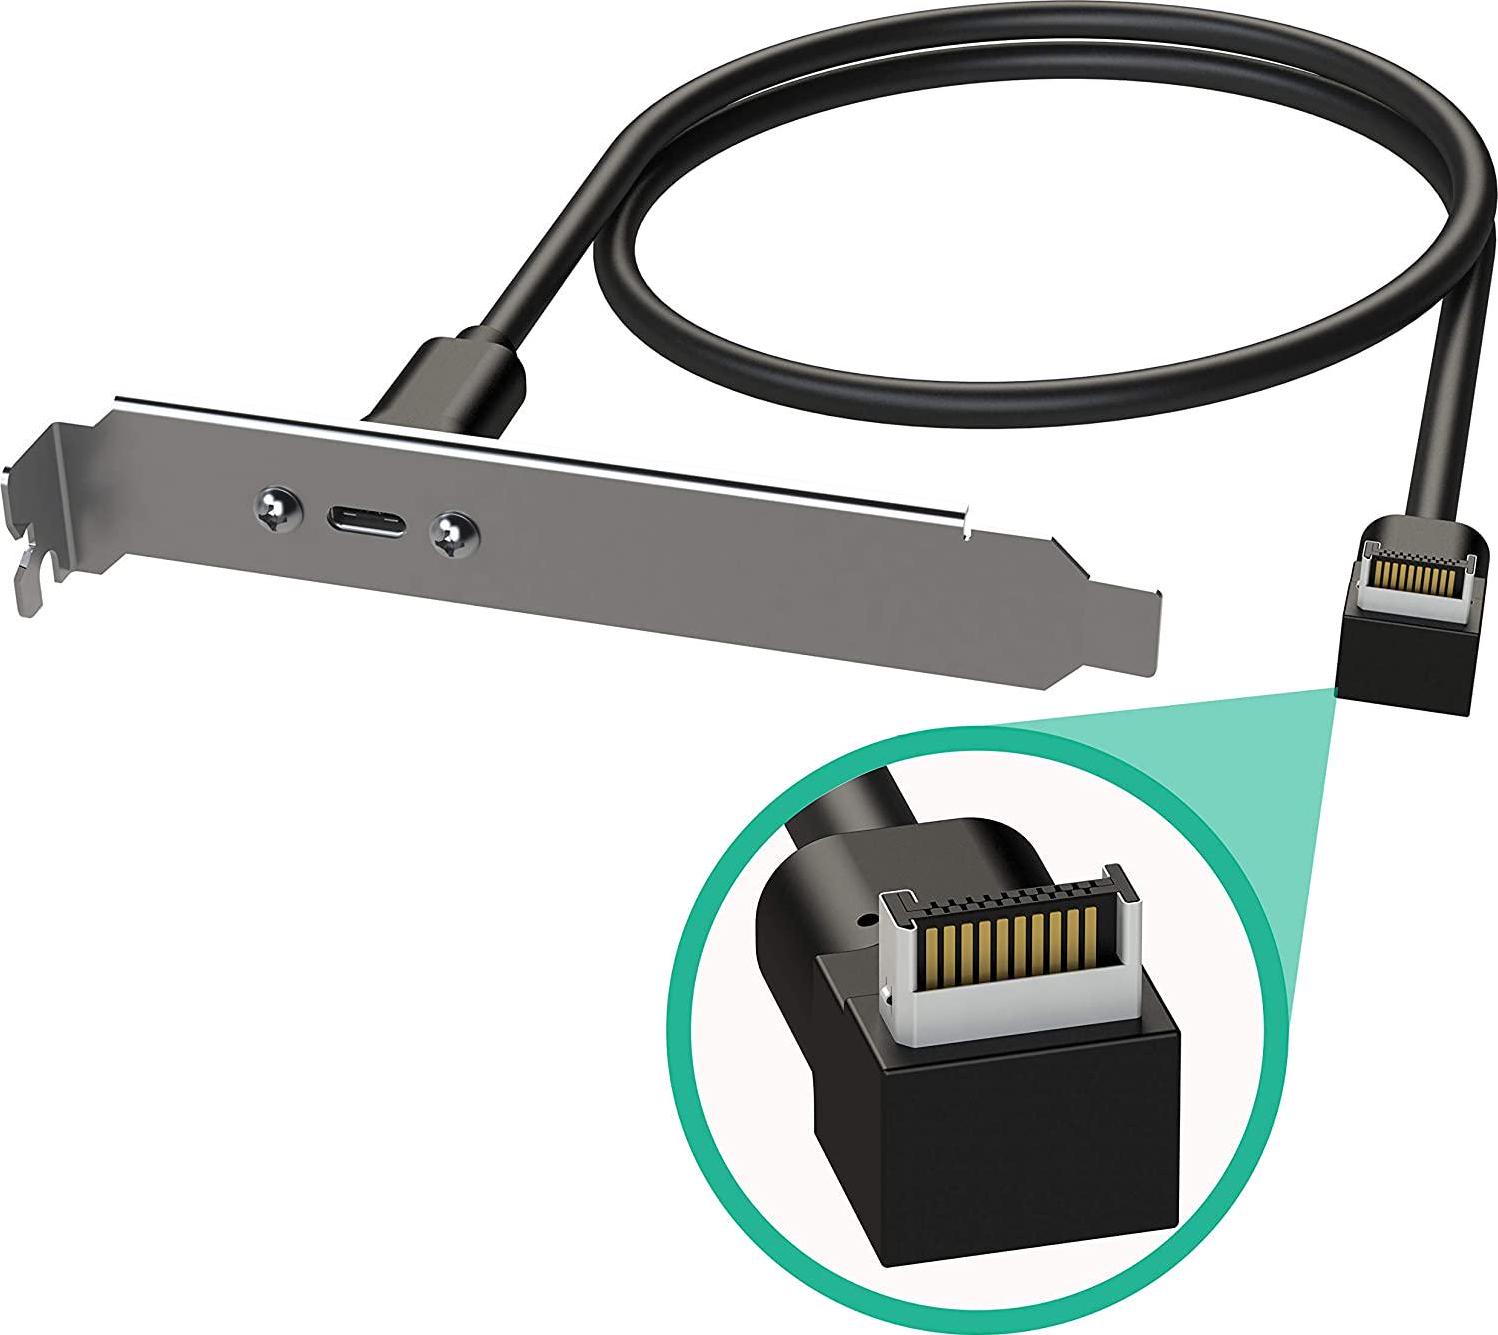 LINKUP, LINKUP - USB3.2 Gen2 2x2 20Gbps USB-C Type Internal Panel Cable Mount Motherboard Header Extension Adapter 20-Pin A-Key Male with Cover to USB-C Female Connector with PCI Bracket - Right Angle - 60cm